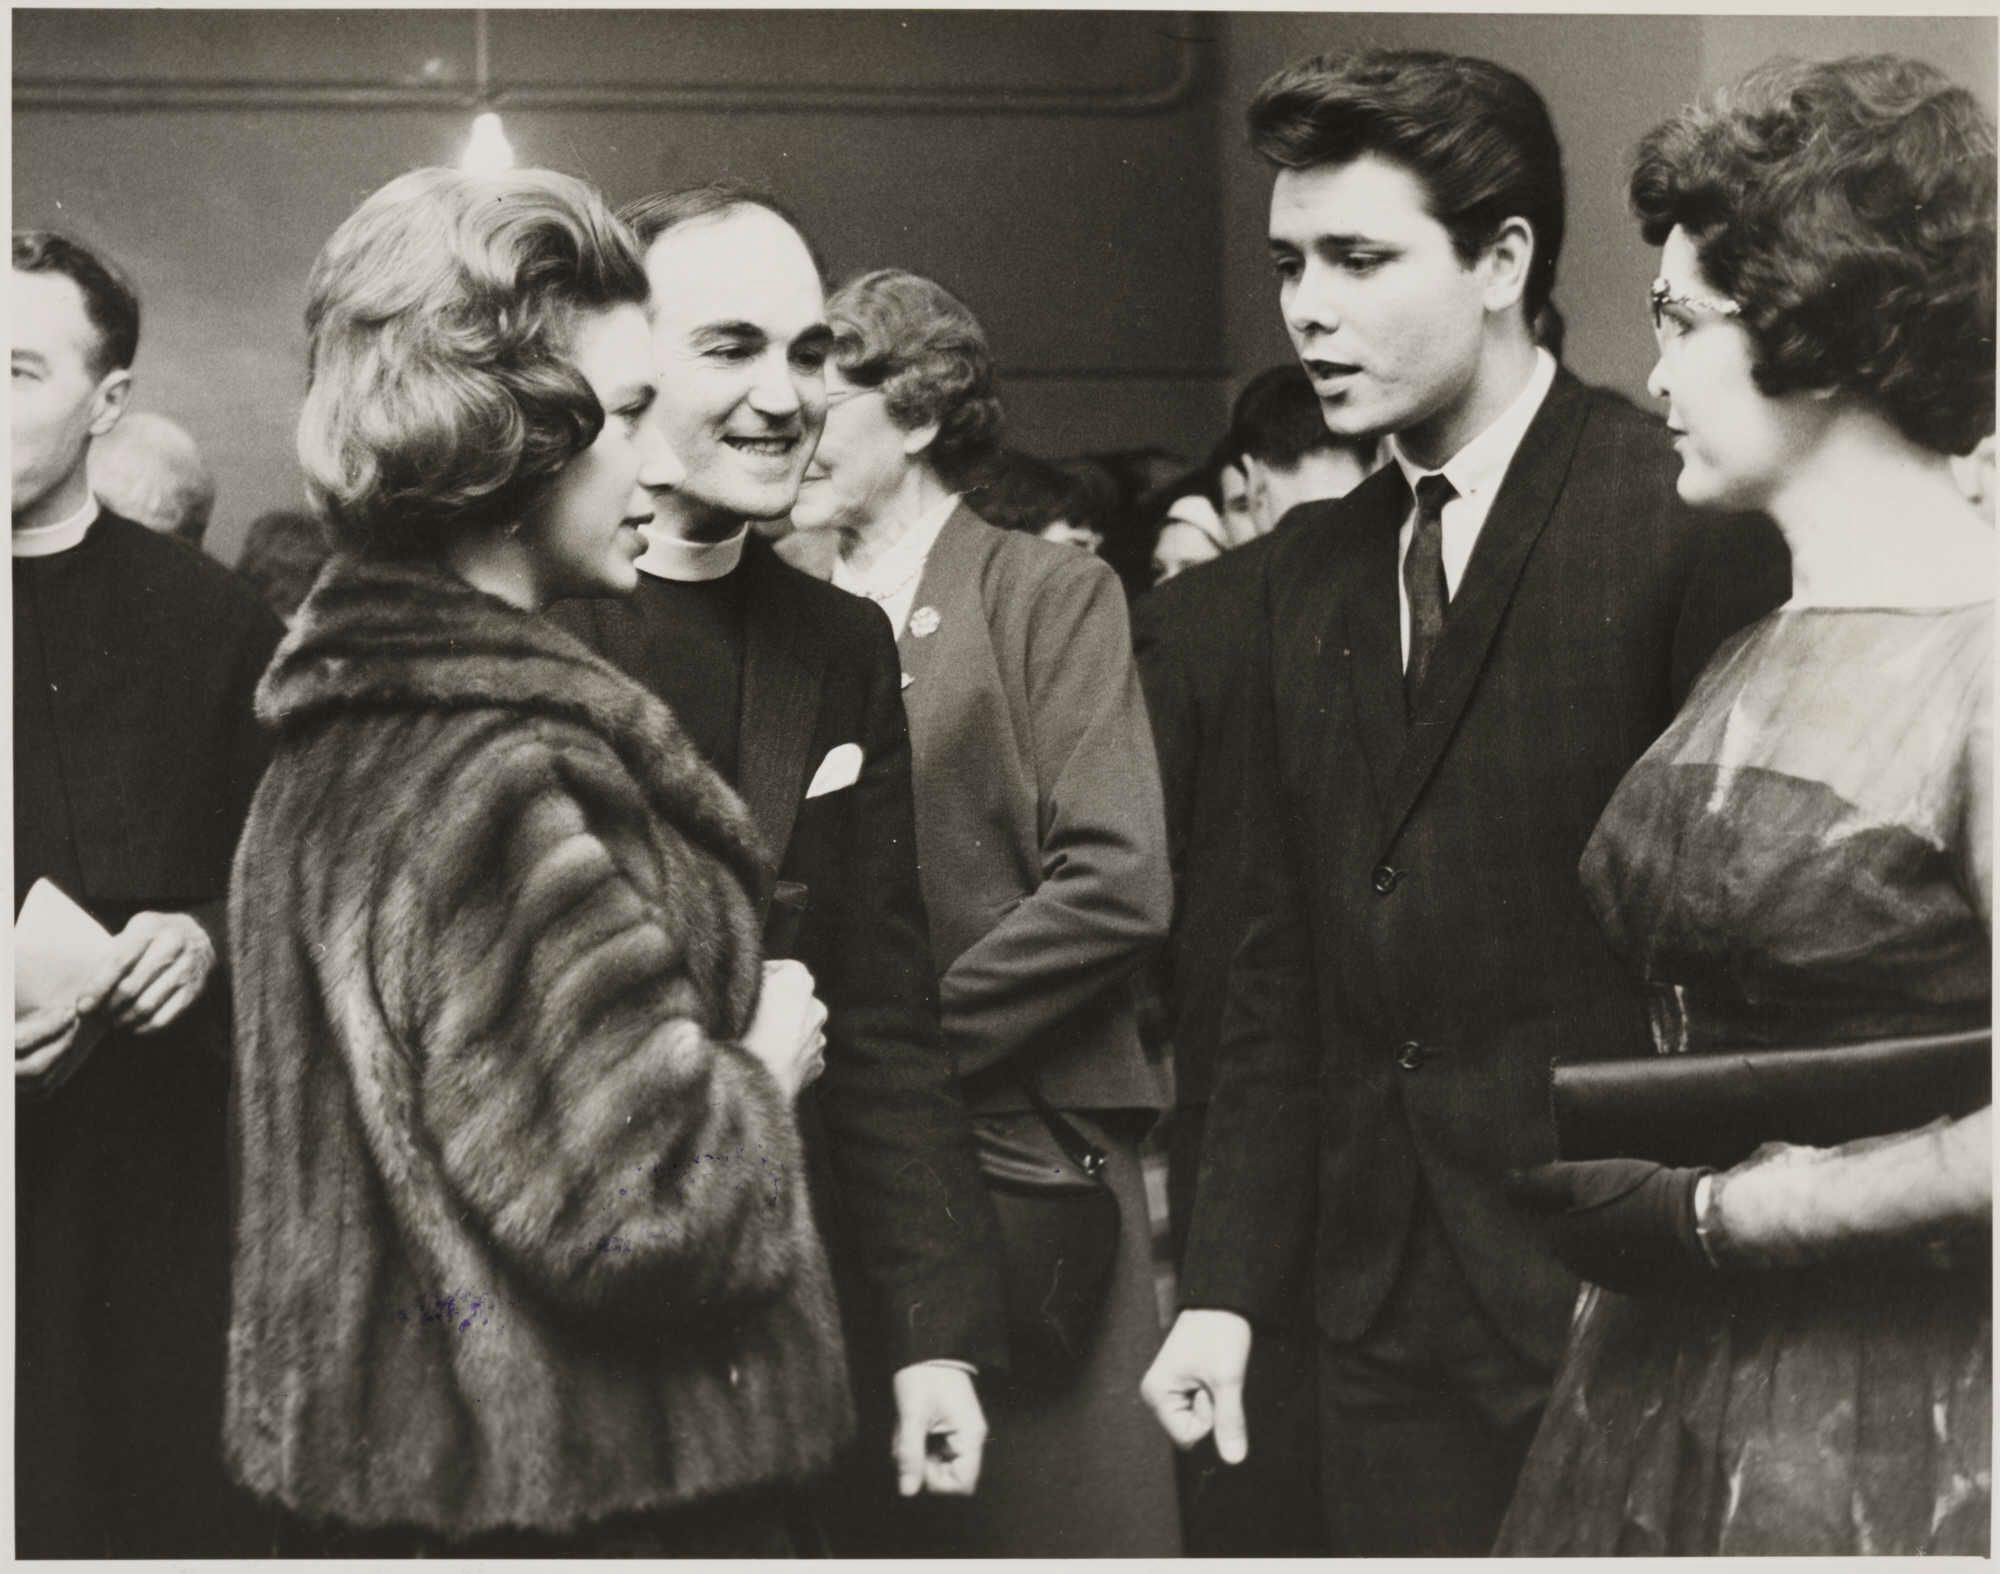 Princess Margaret (left) and Cliff Richard at the 59 Club, London in 1962